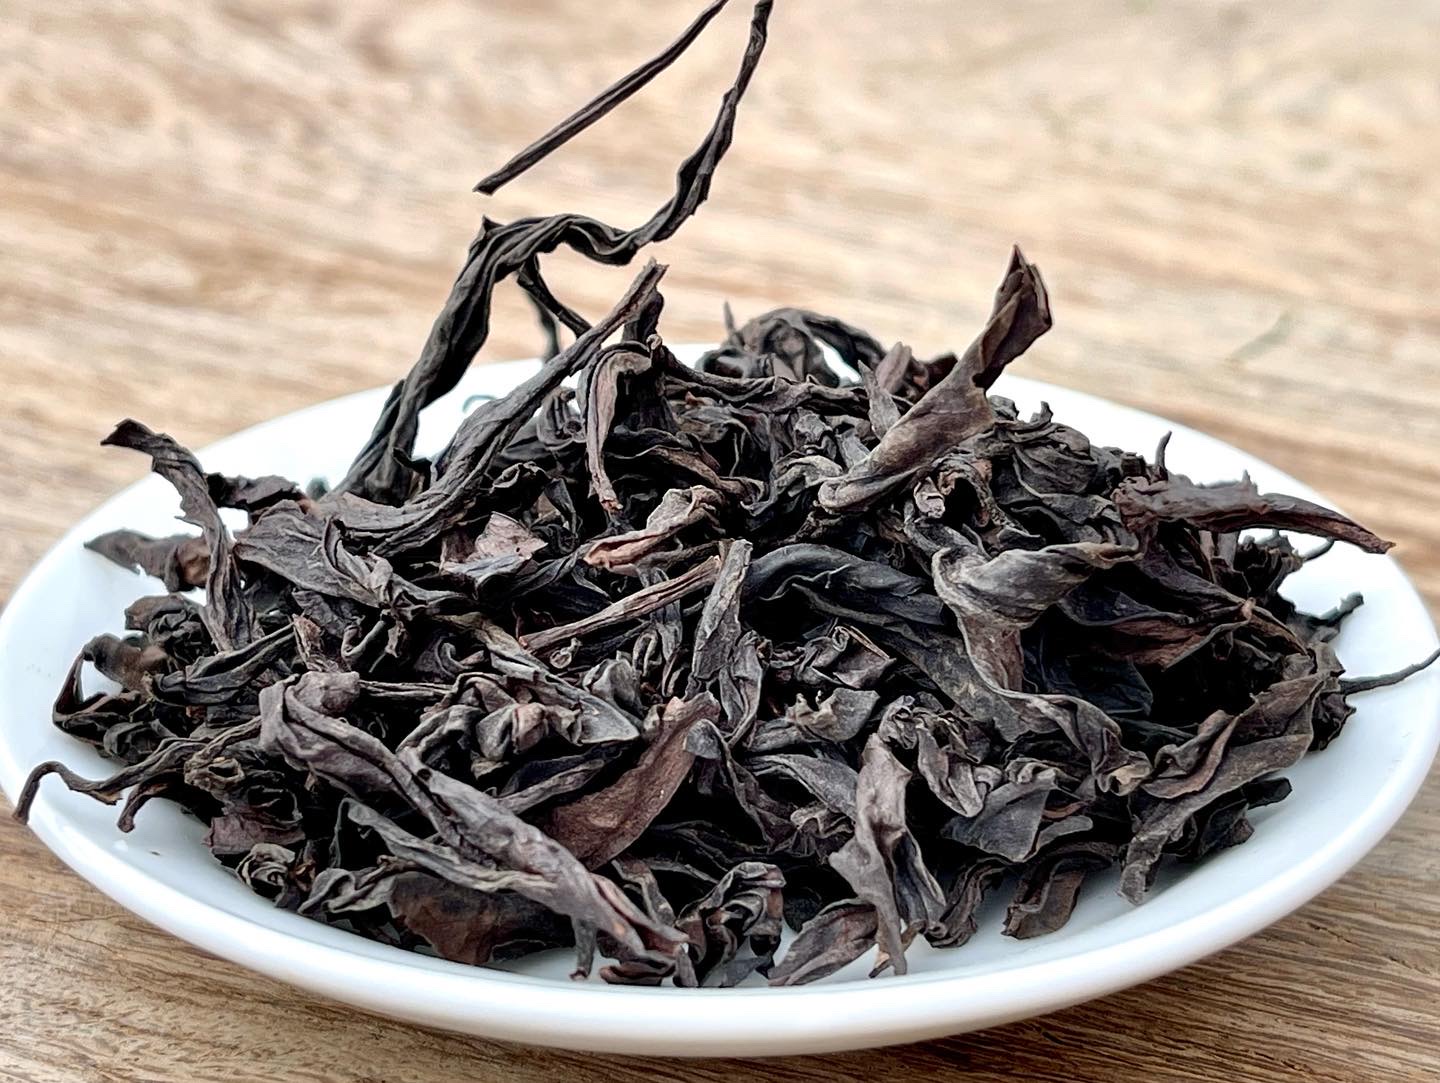 Rougui Yancha oolong tea leaves in a bowl on the table